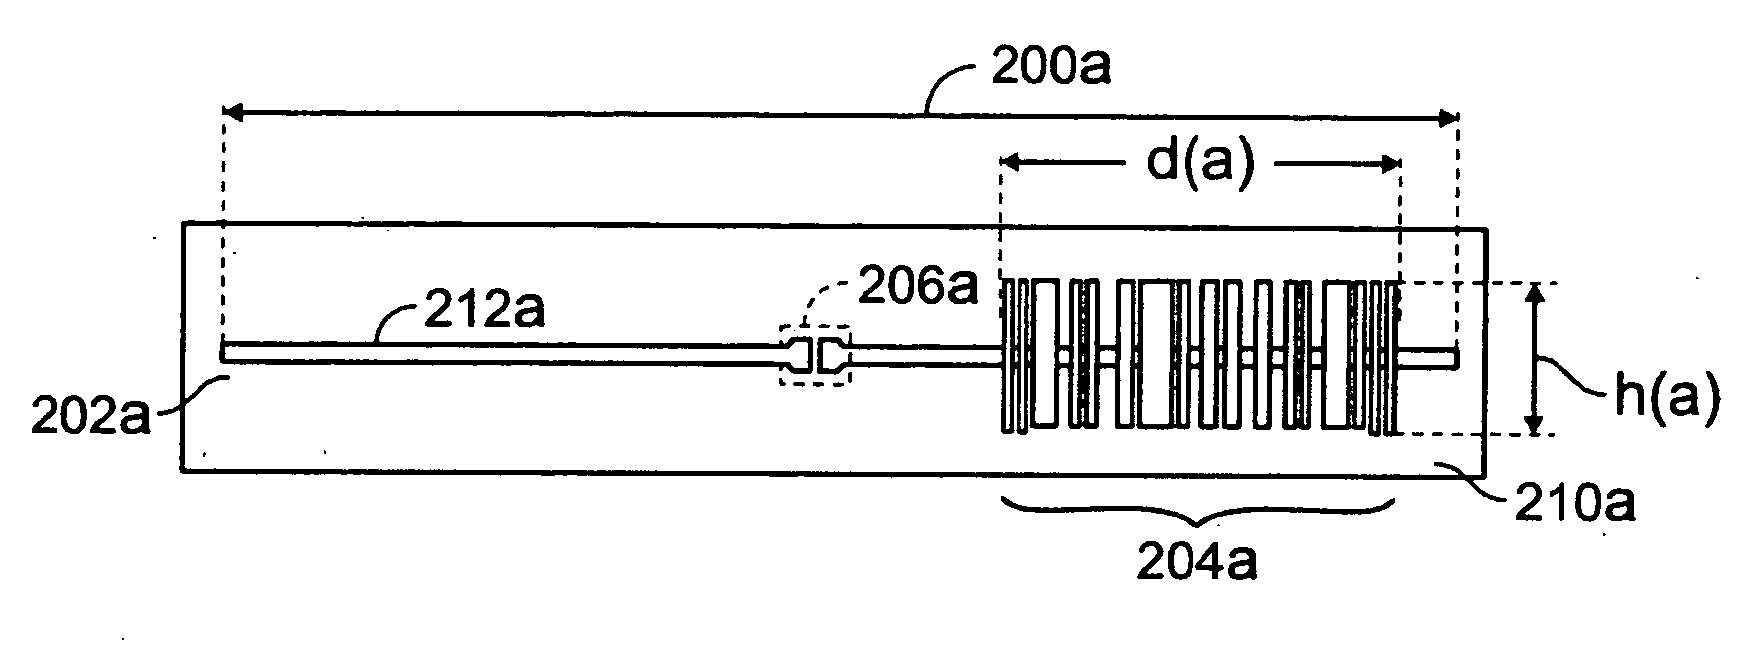 RFID tag with antenna comprising optical code or symbol